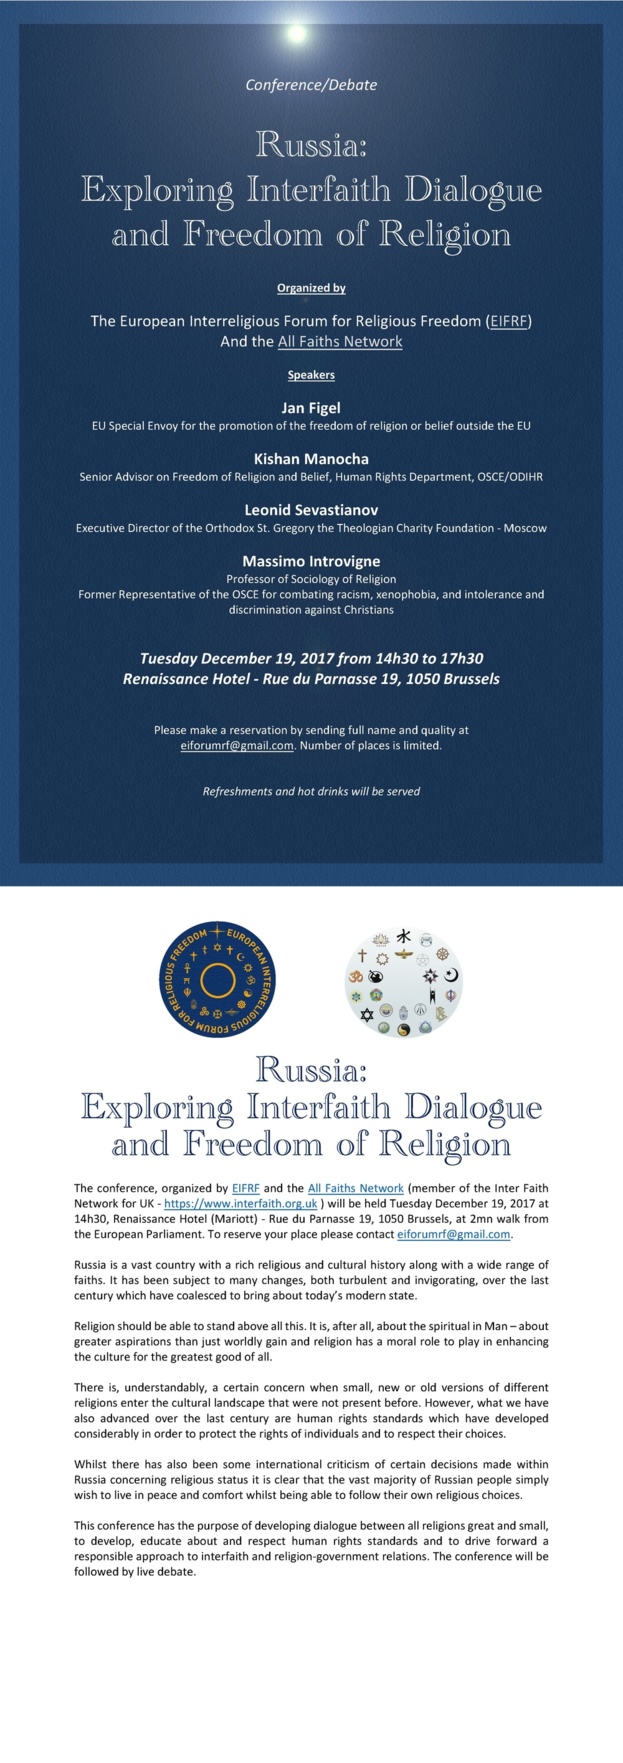 Russia:  Exploring Interfaith Dialogue  and Freedom of Religion - A conference and debate